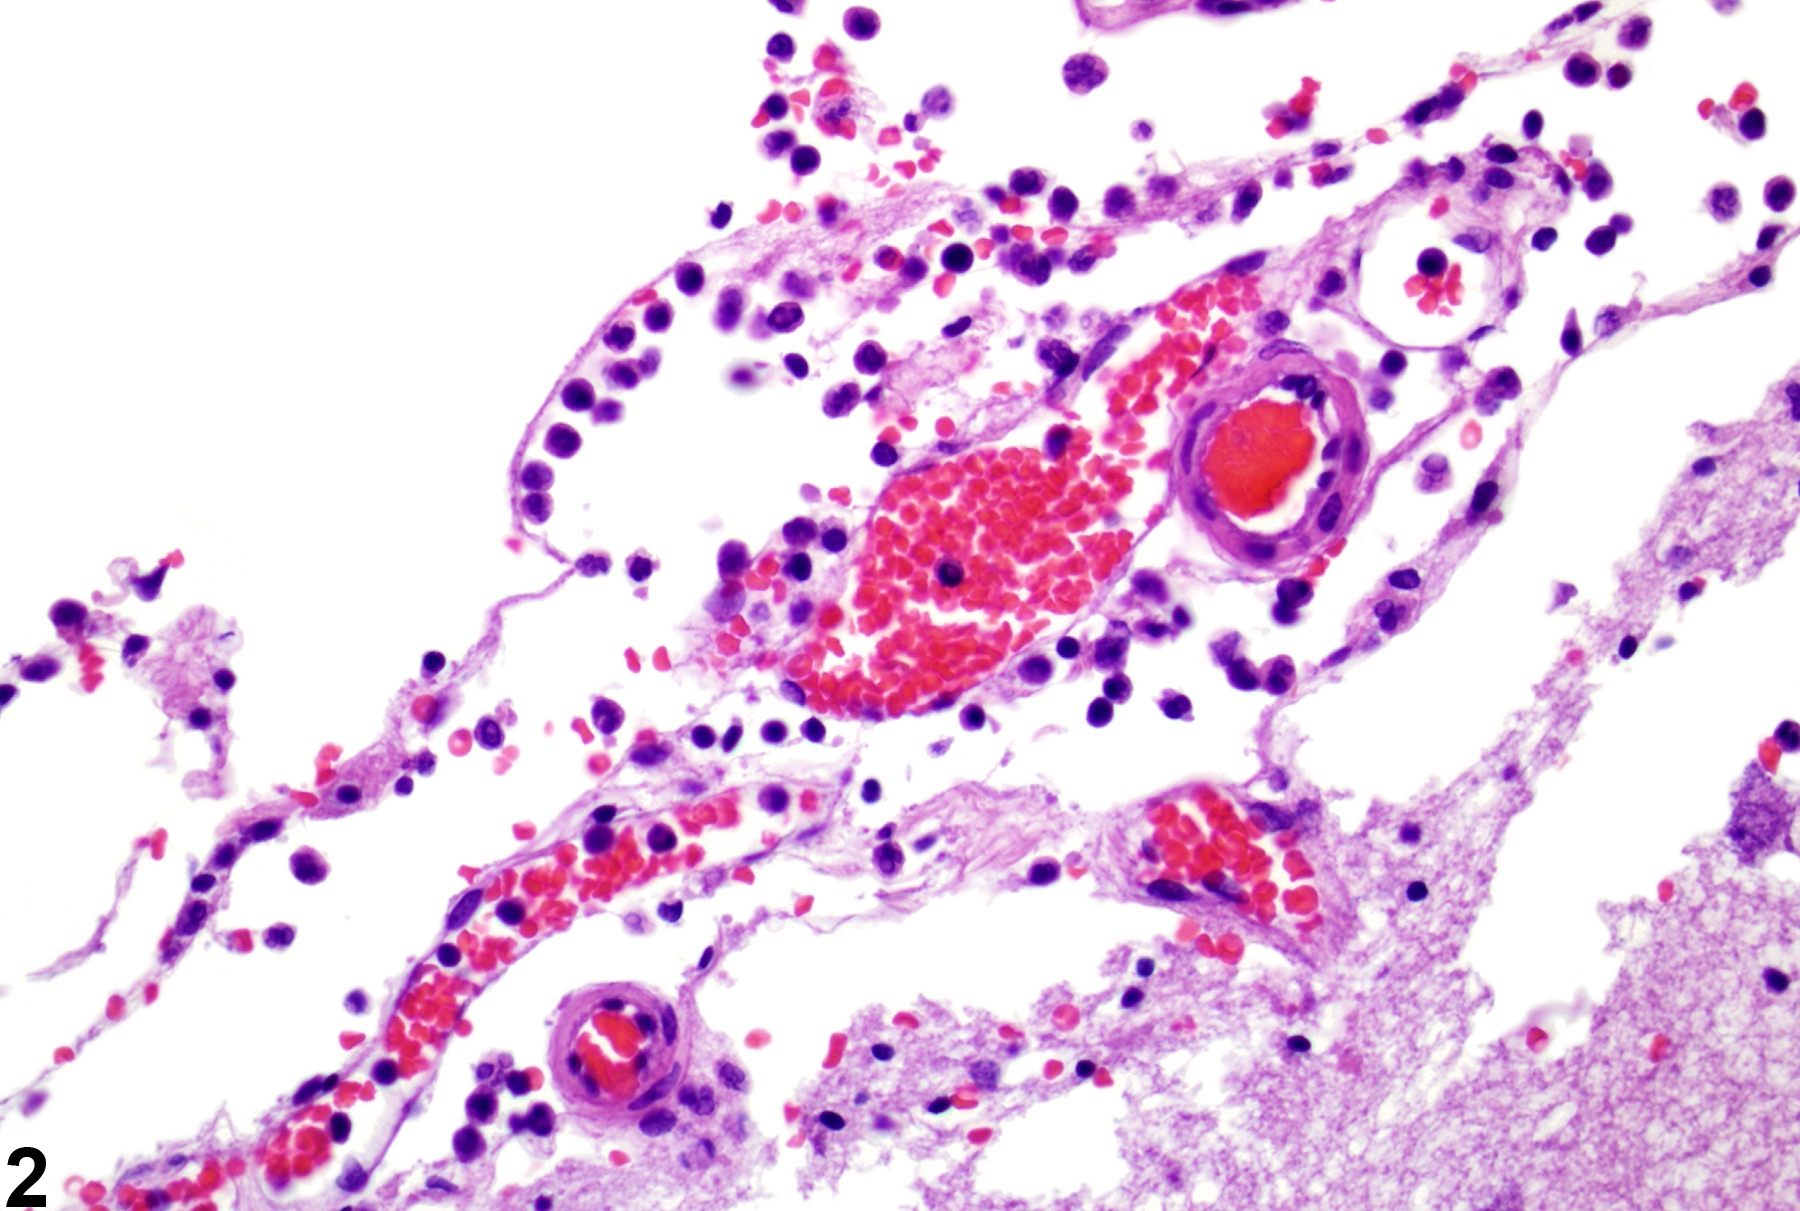 Image of inflammation in the brain from a female B6C3F1 mouse